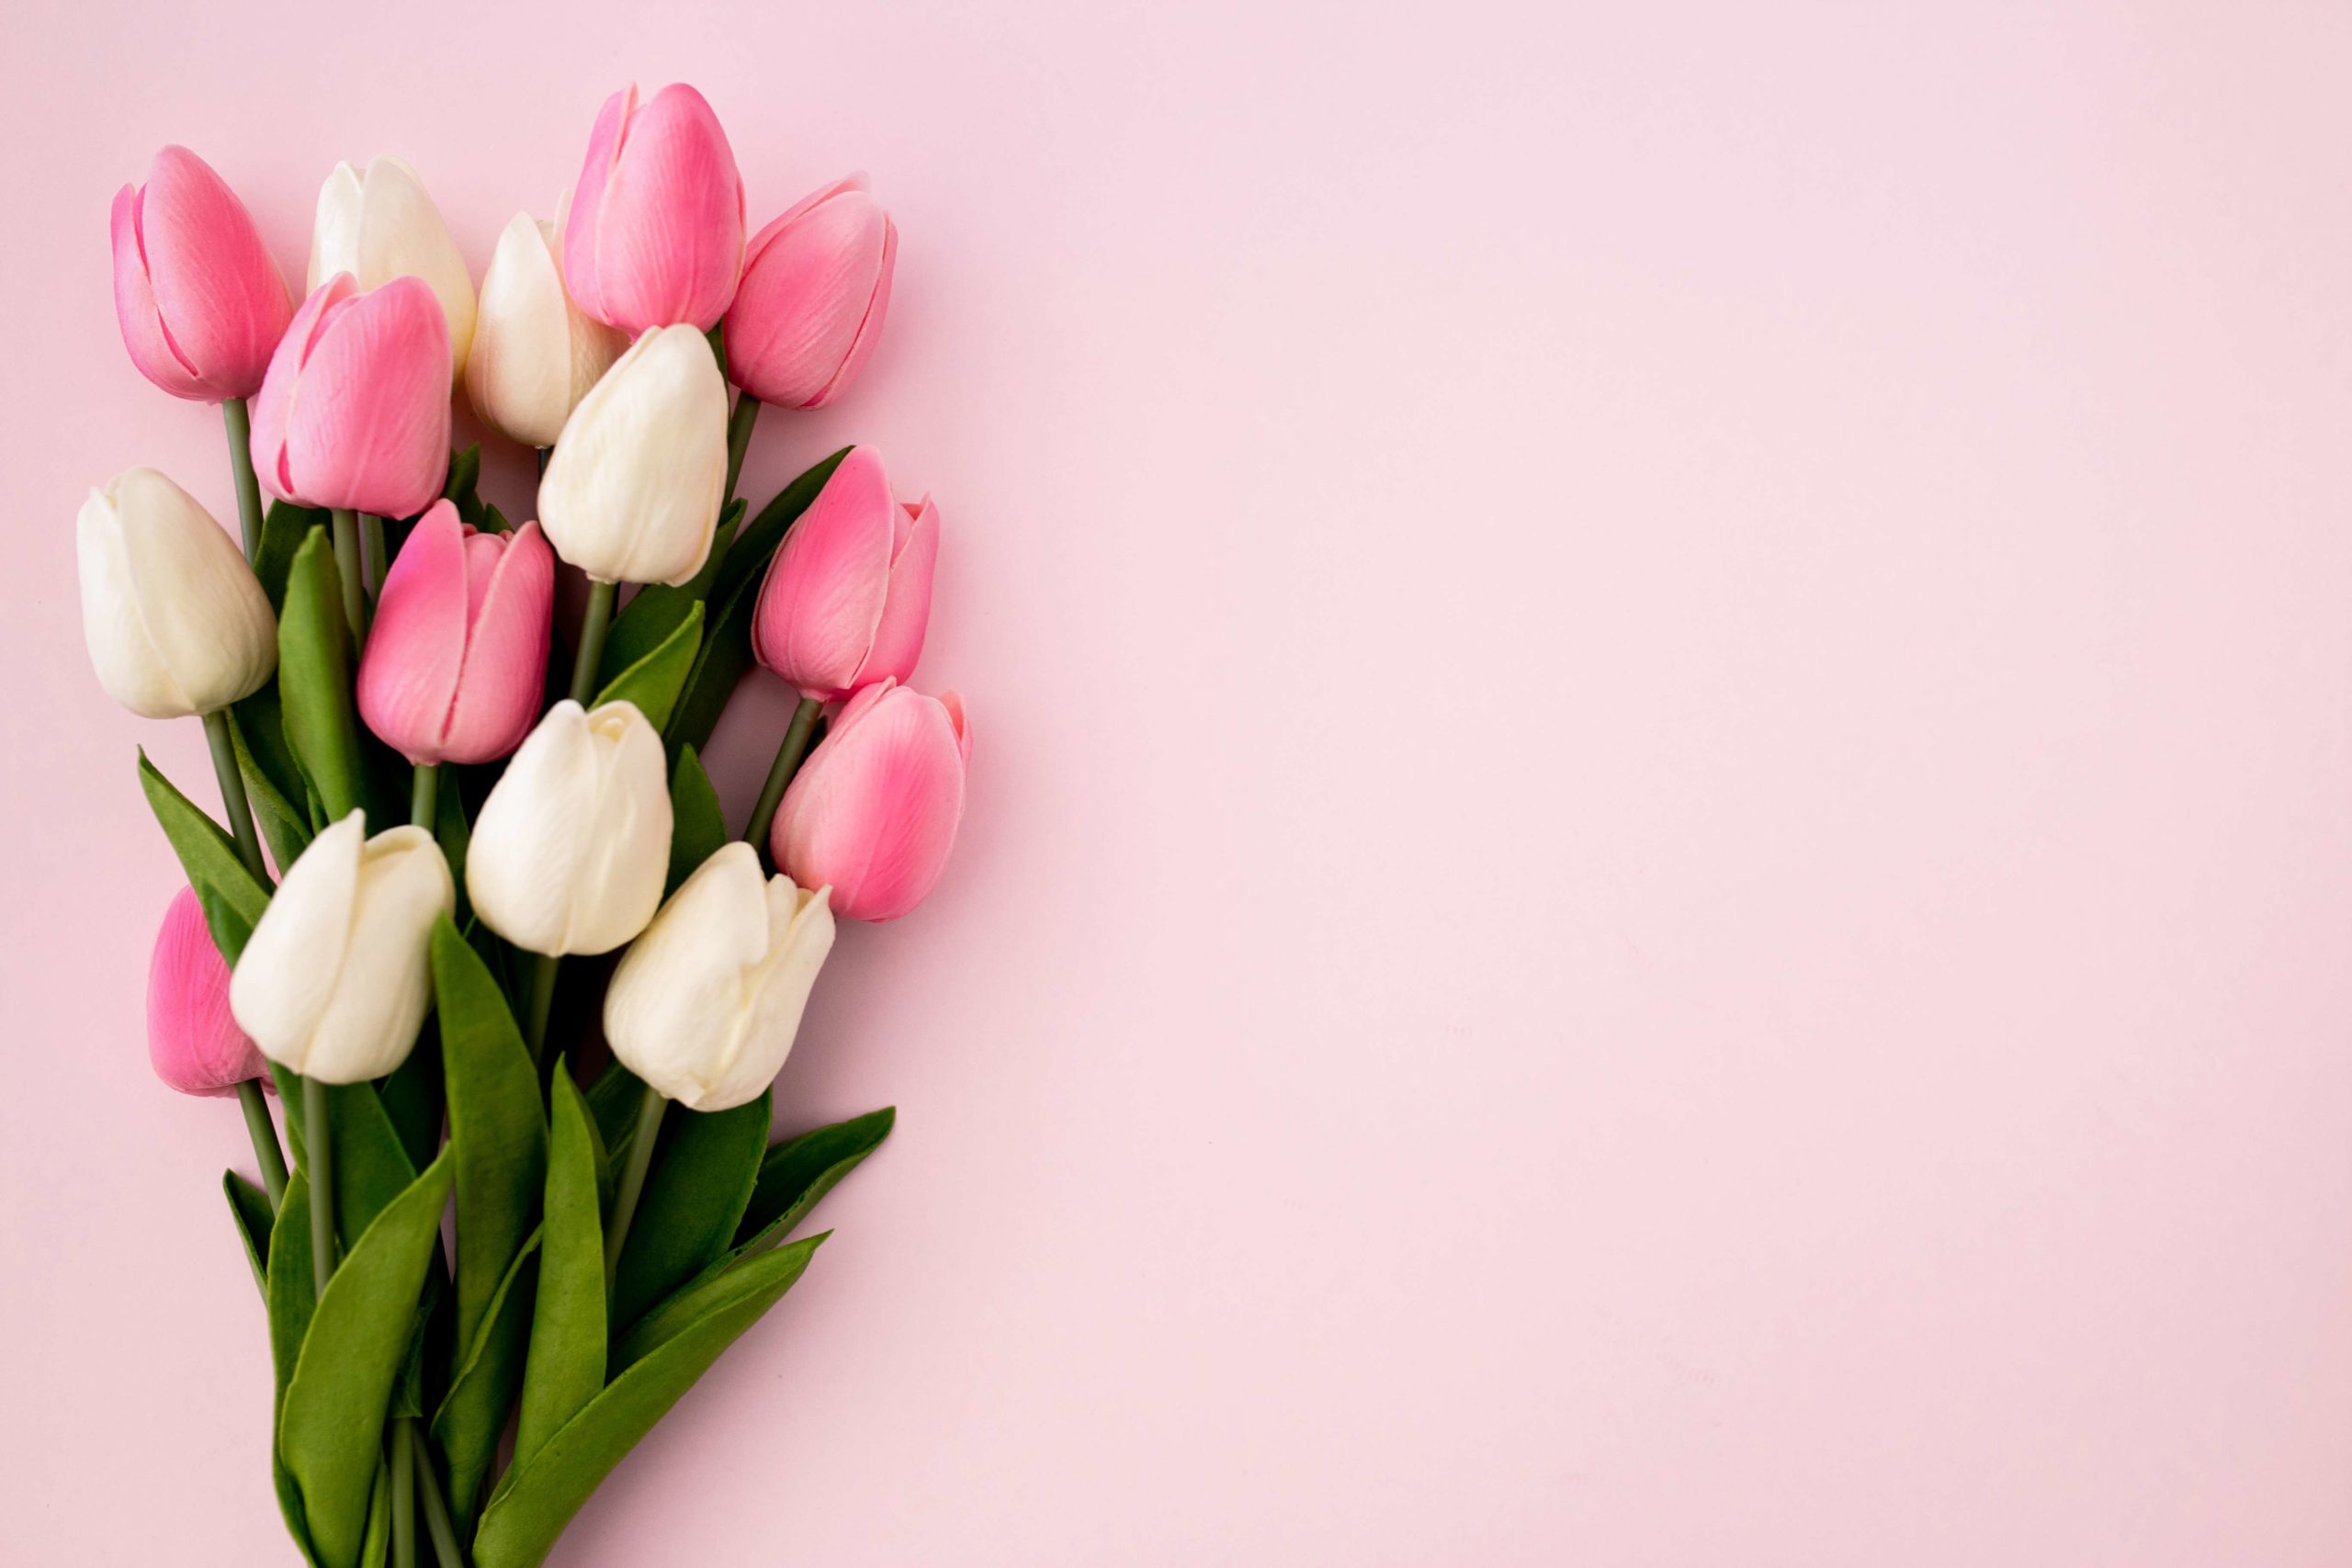 Tulips Bouquet On Pink Background With Copyspace